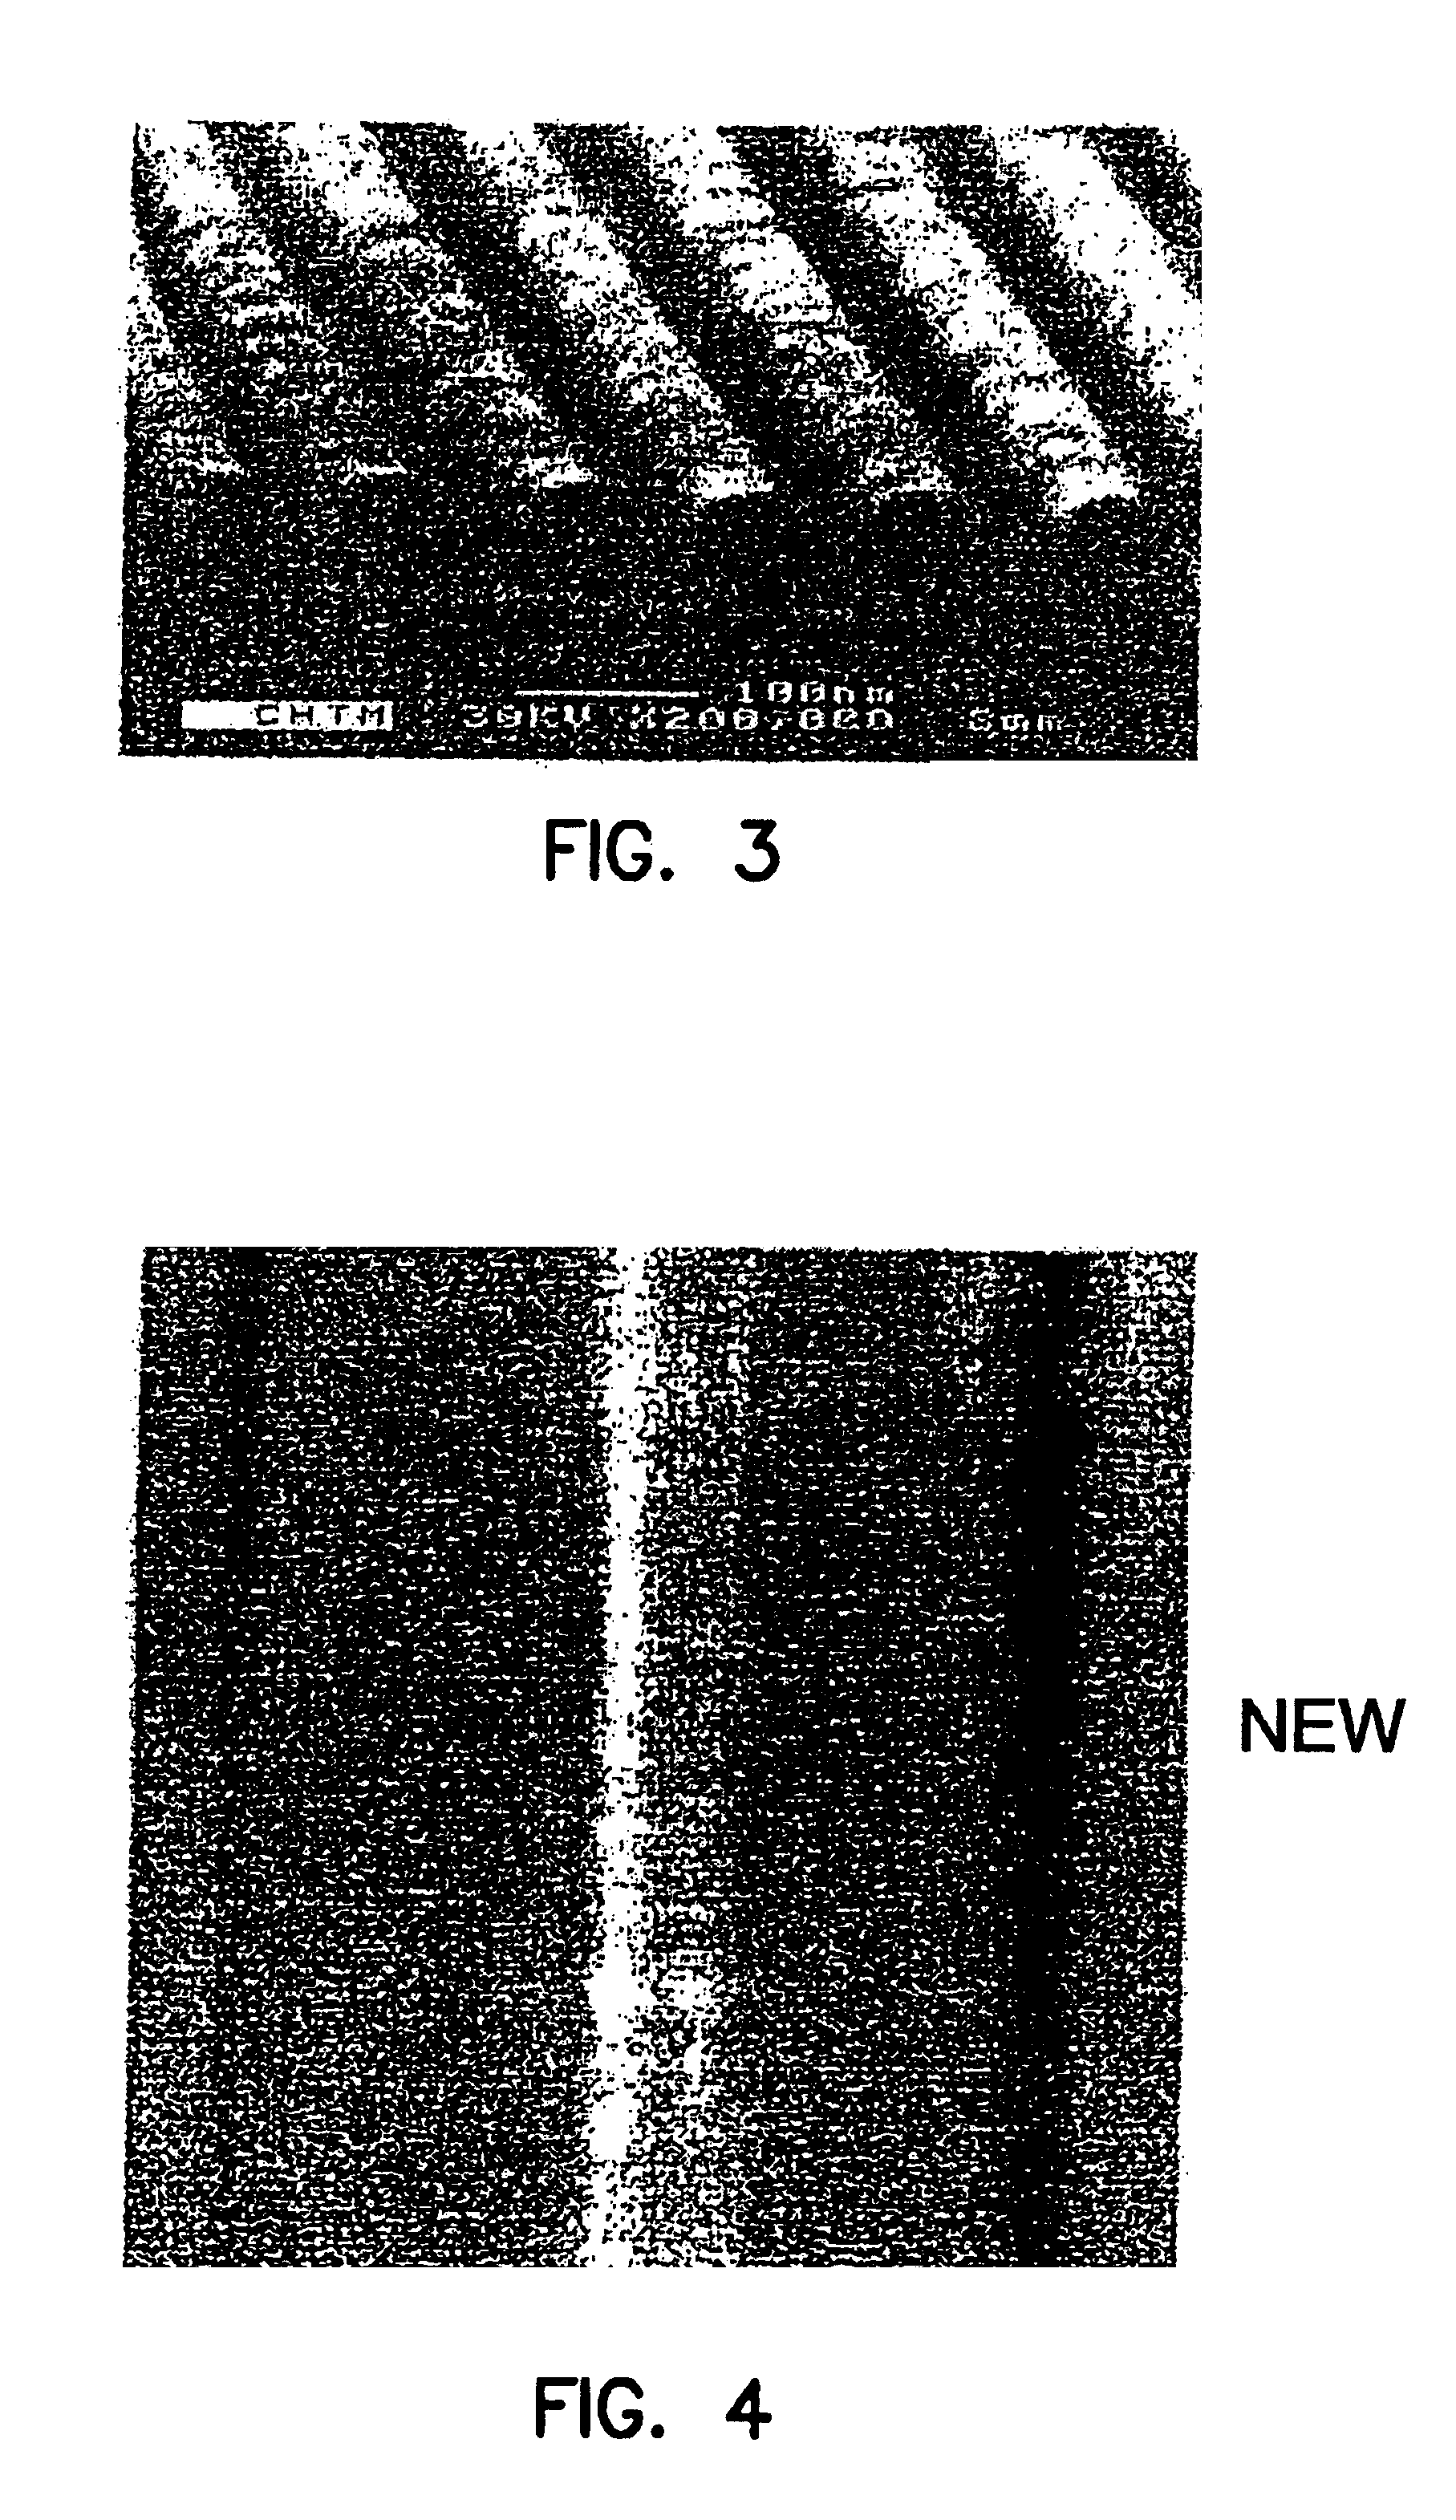 Nanostructured separation and analysis devices for biological membranes